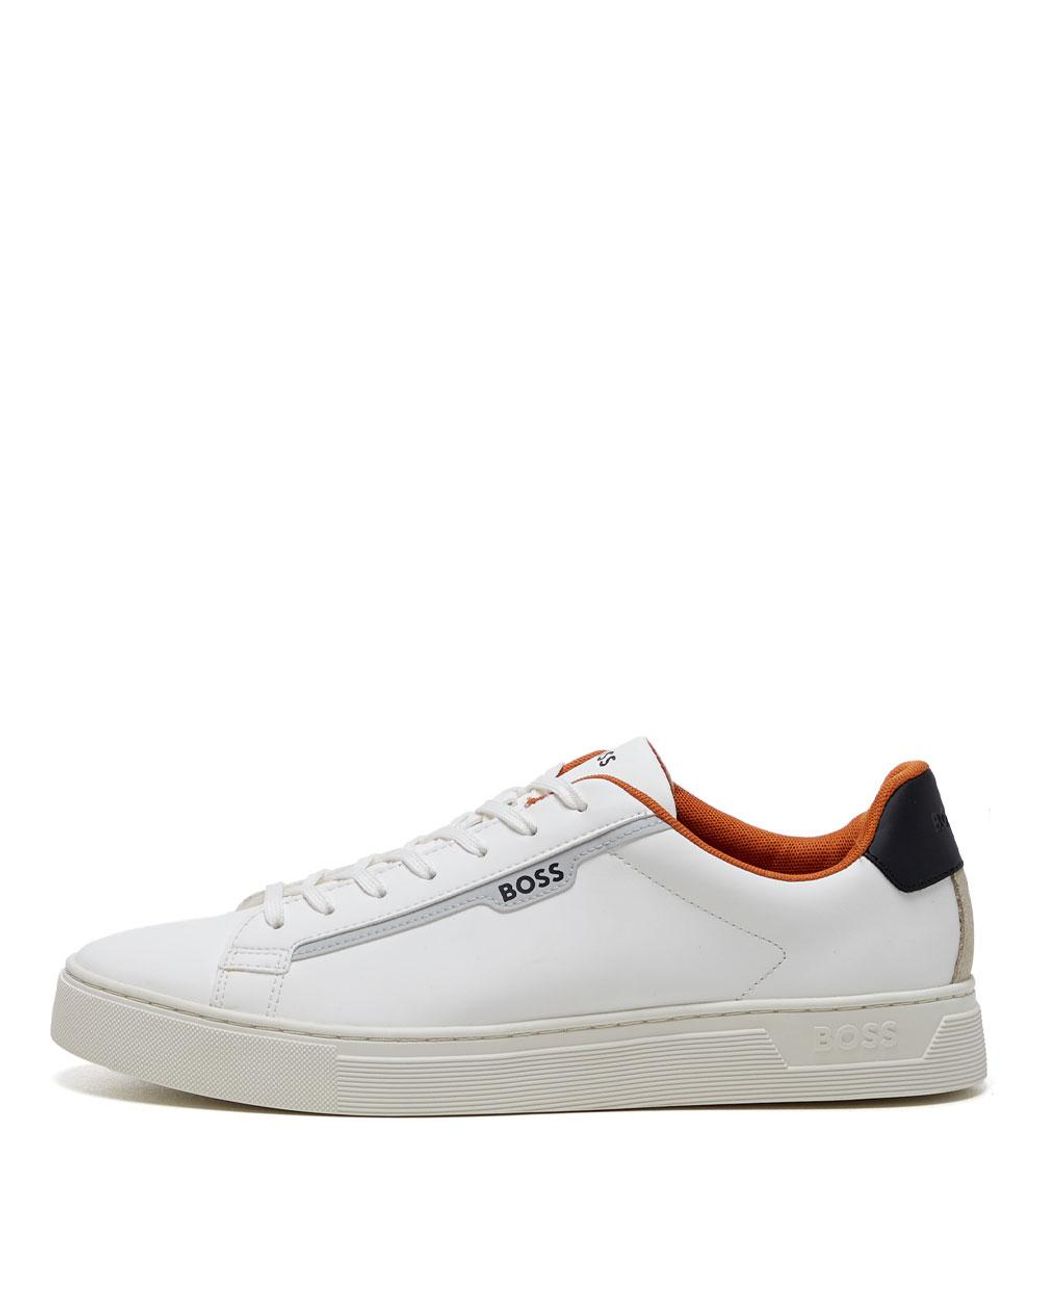 Hugo Boss Shoes in Adabraka - Shoes, Stone Unisex Collections | Jiji.com.gh